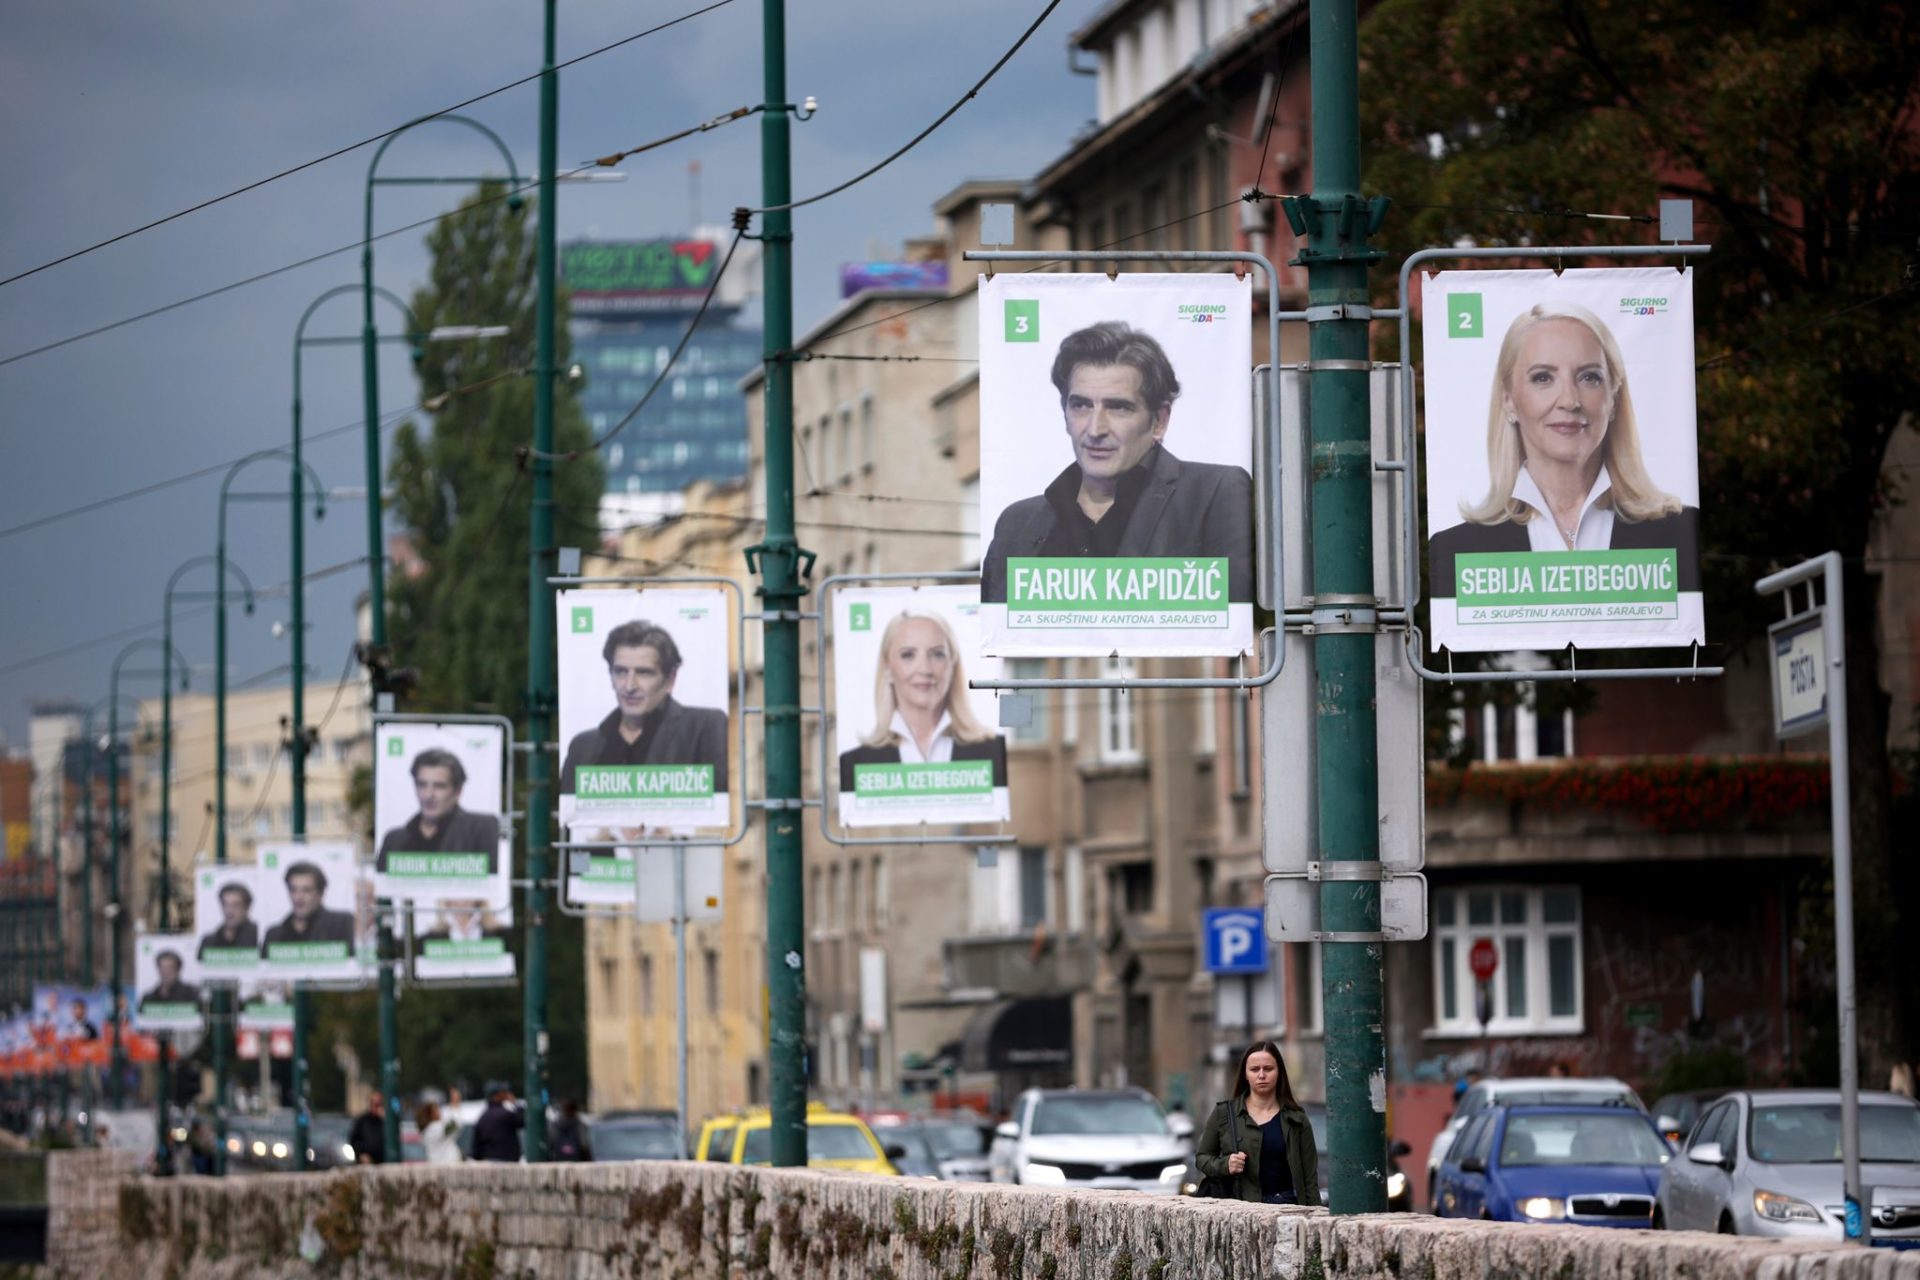 Europe in brief: EU recommends candidate status for BiH, ECJ sees no discrimination in headscarf ban, Austrian Chancellor Karl Nehammer criticizes EU Commission over migration and EU wants to protect Ukrainian refugees until 2024